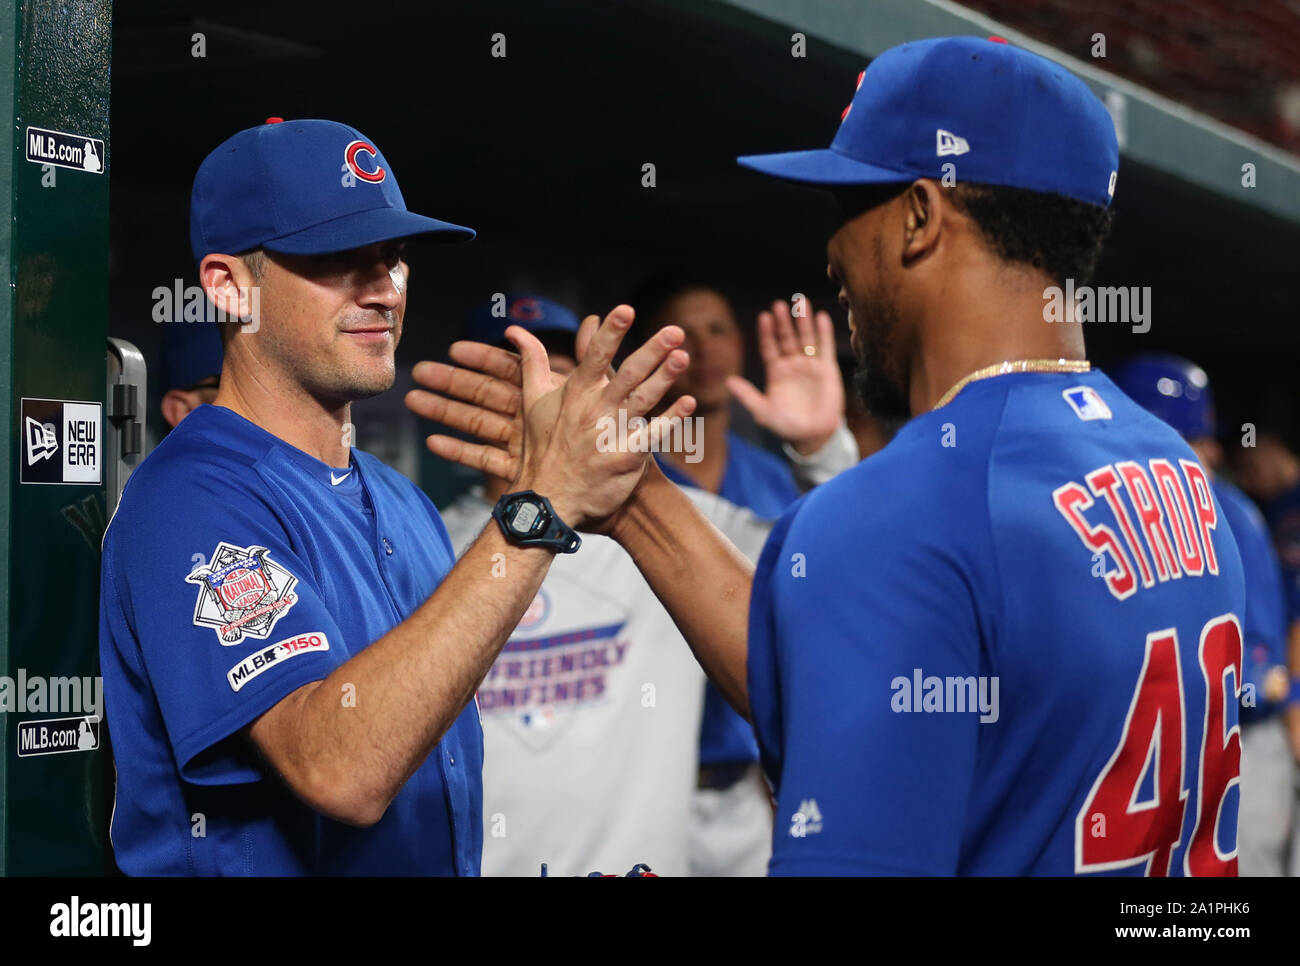 St. Louis, United States. 28th Sep, 2019. Chicago Cubs pitcher Pedro Strop (R) is congratulated by coach Tommy Hottovy, after recording his 500th career strikeout in the eighth inning against the St. Louis Cardinals at Busch Stadium in St. Louis on Friday, September 27, 2019. Chicago defeated St. Louis 8-2. Photo by BIll Greenblatt/UPI Credit: UPI/Alamy Live News Stock Photo